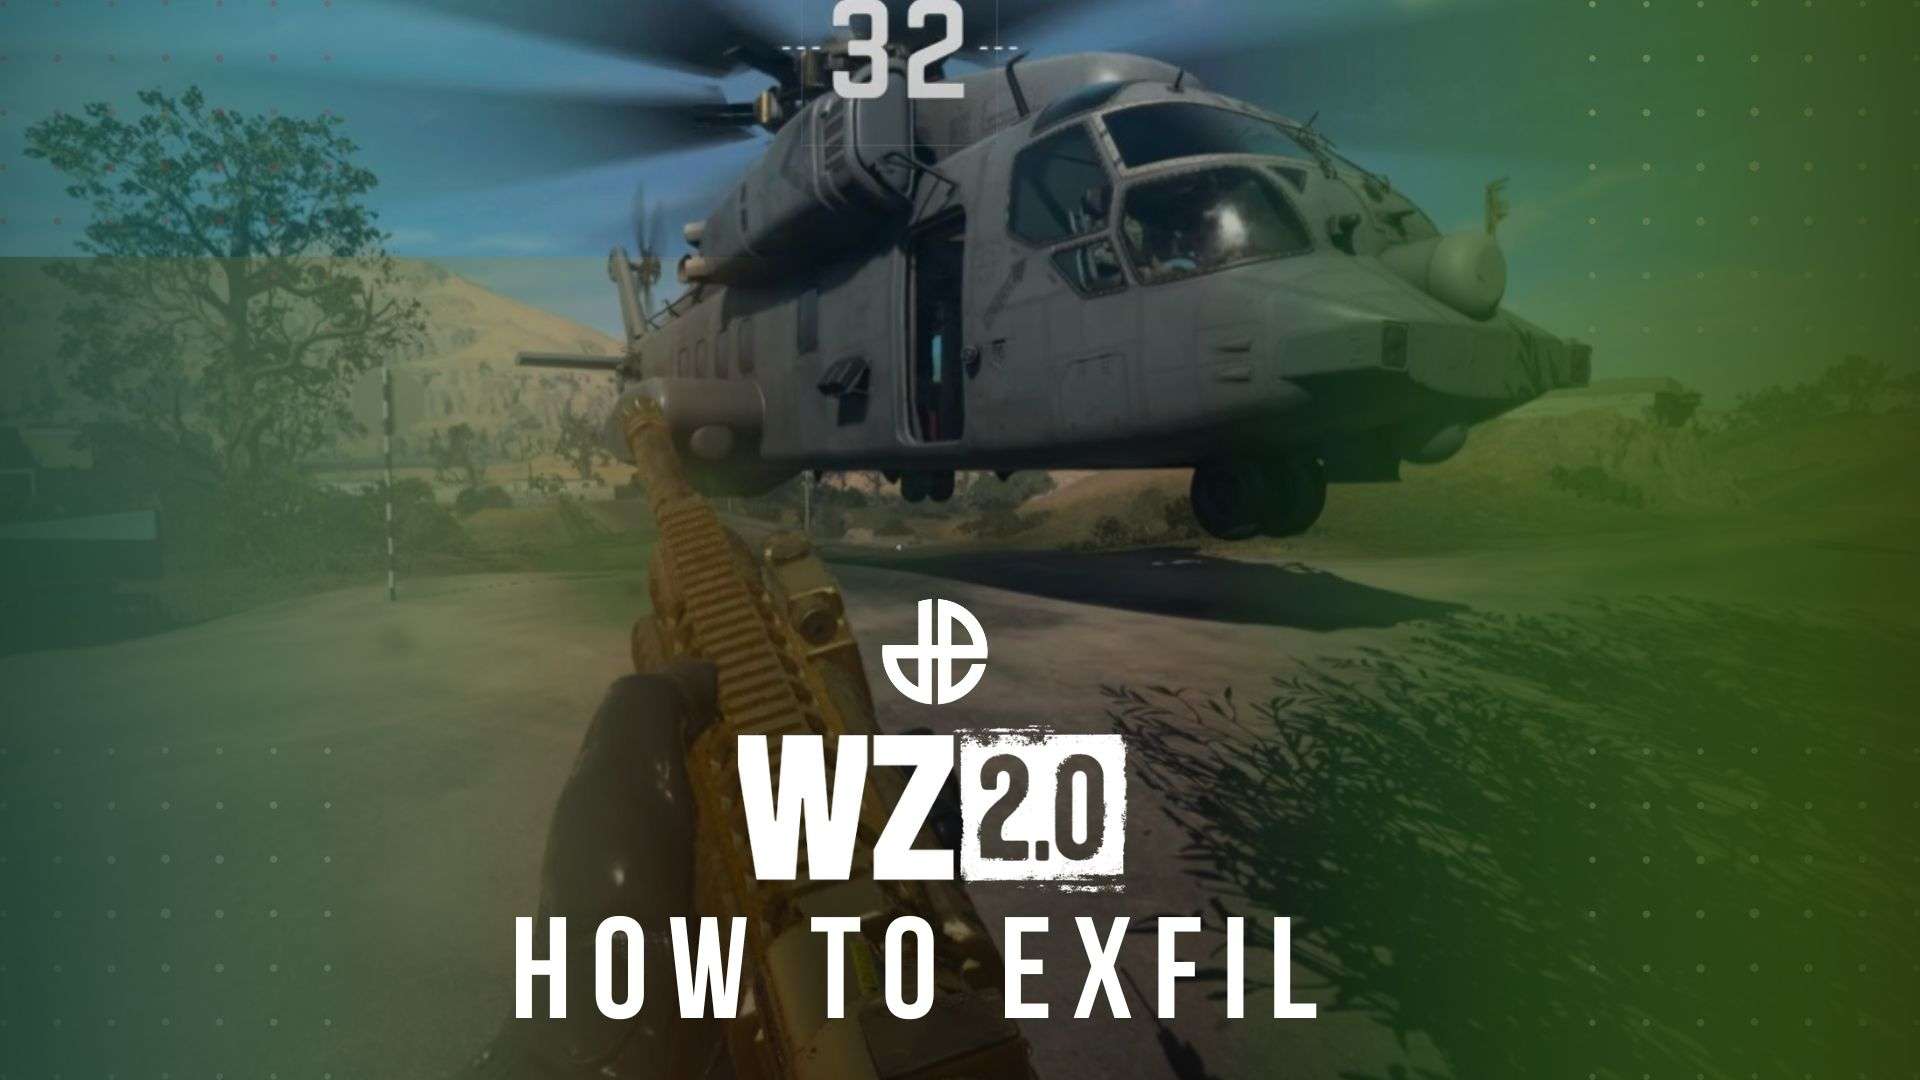 Exfil helicopter in Warzone 2 DMZ mode